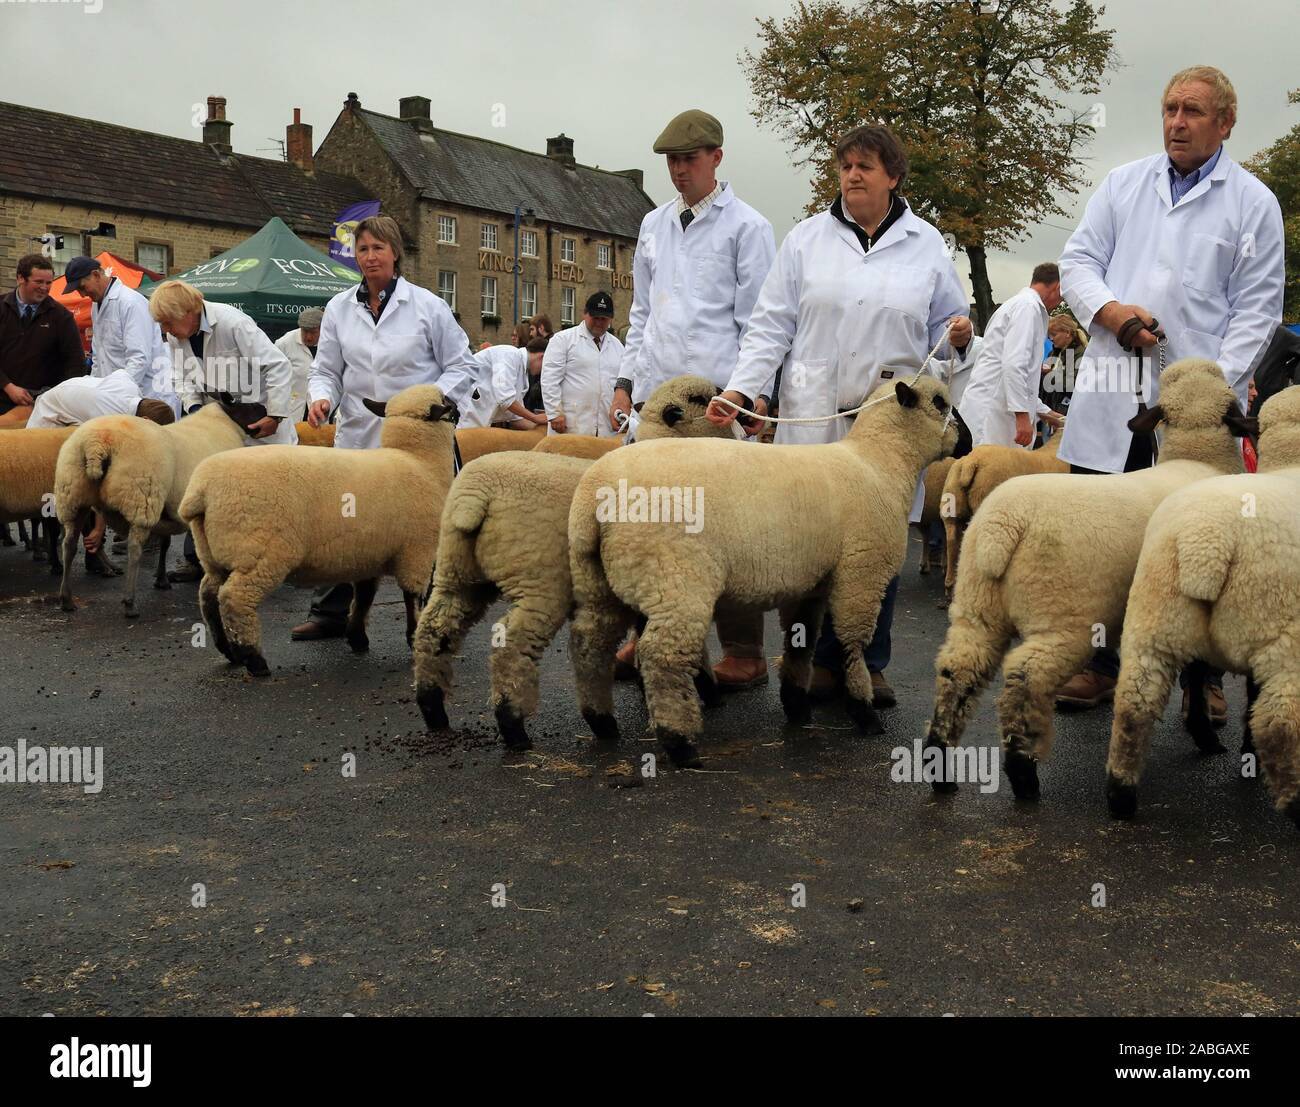 Shepherds’ getting their sheep ready for the judging in the show ring at the Masham sheep fair. Concentration and hope to win. Stock Photo